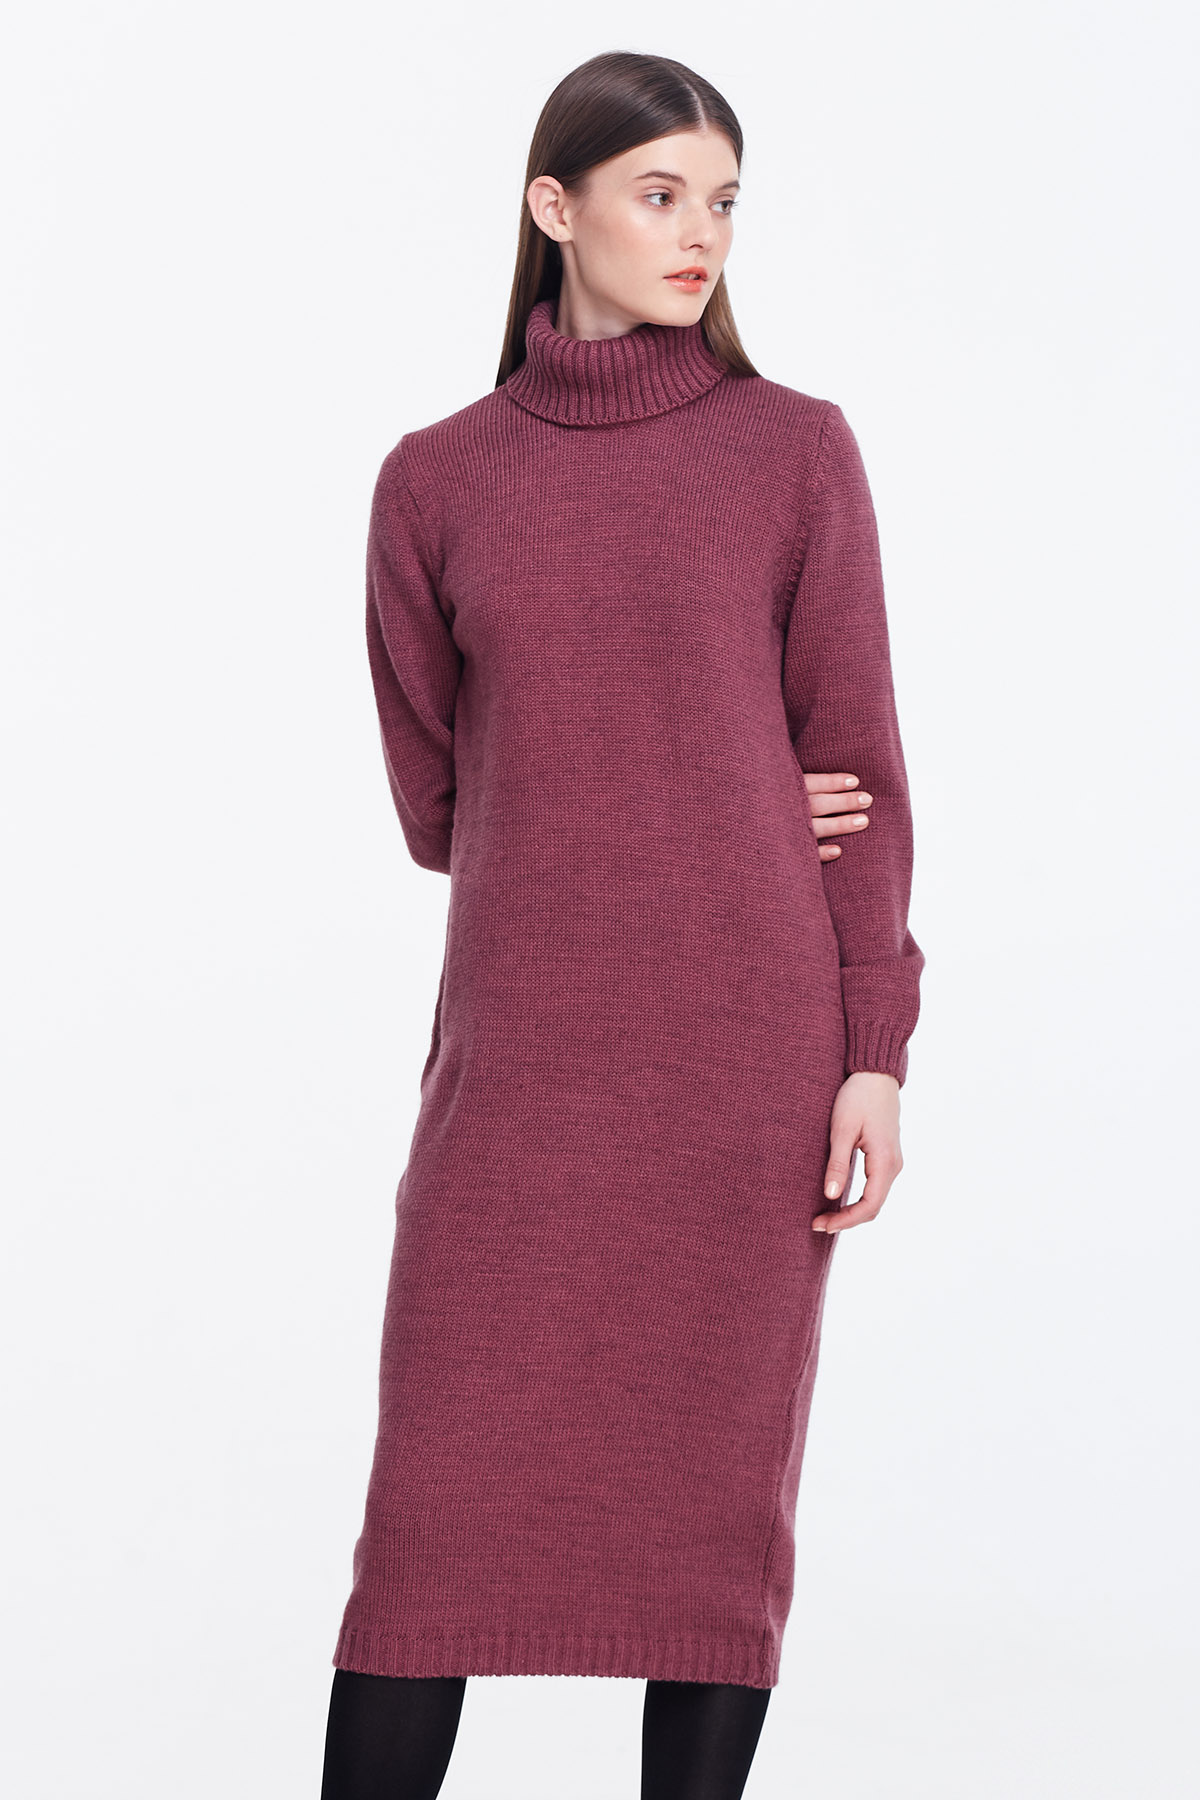 Wine knit dress with a stand up collar, photo 1